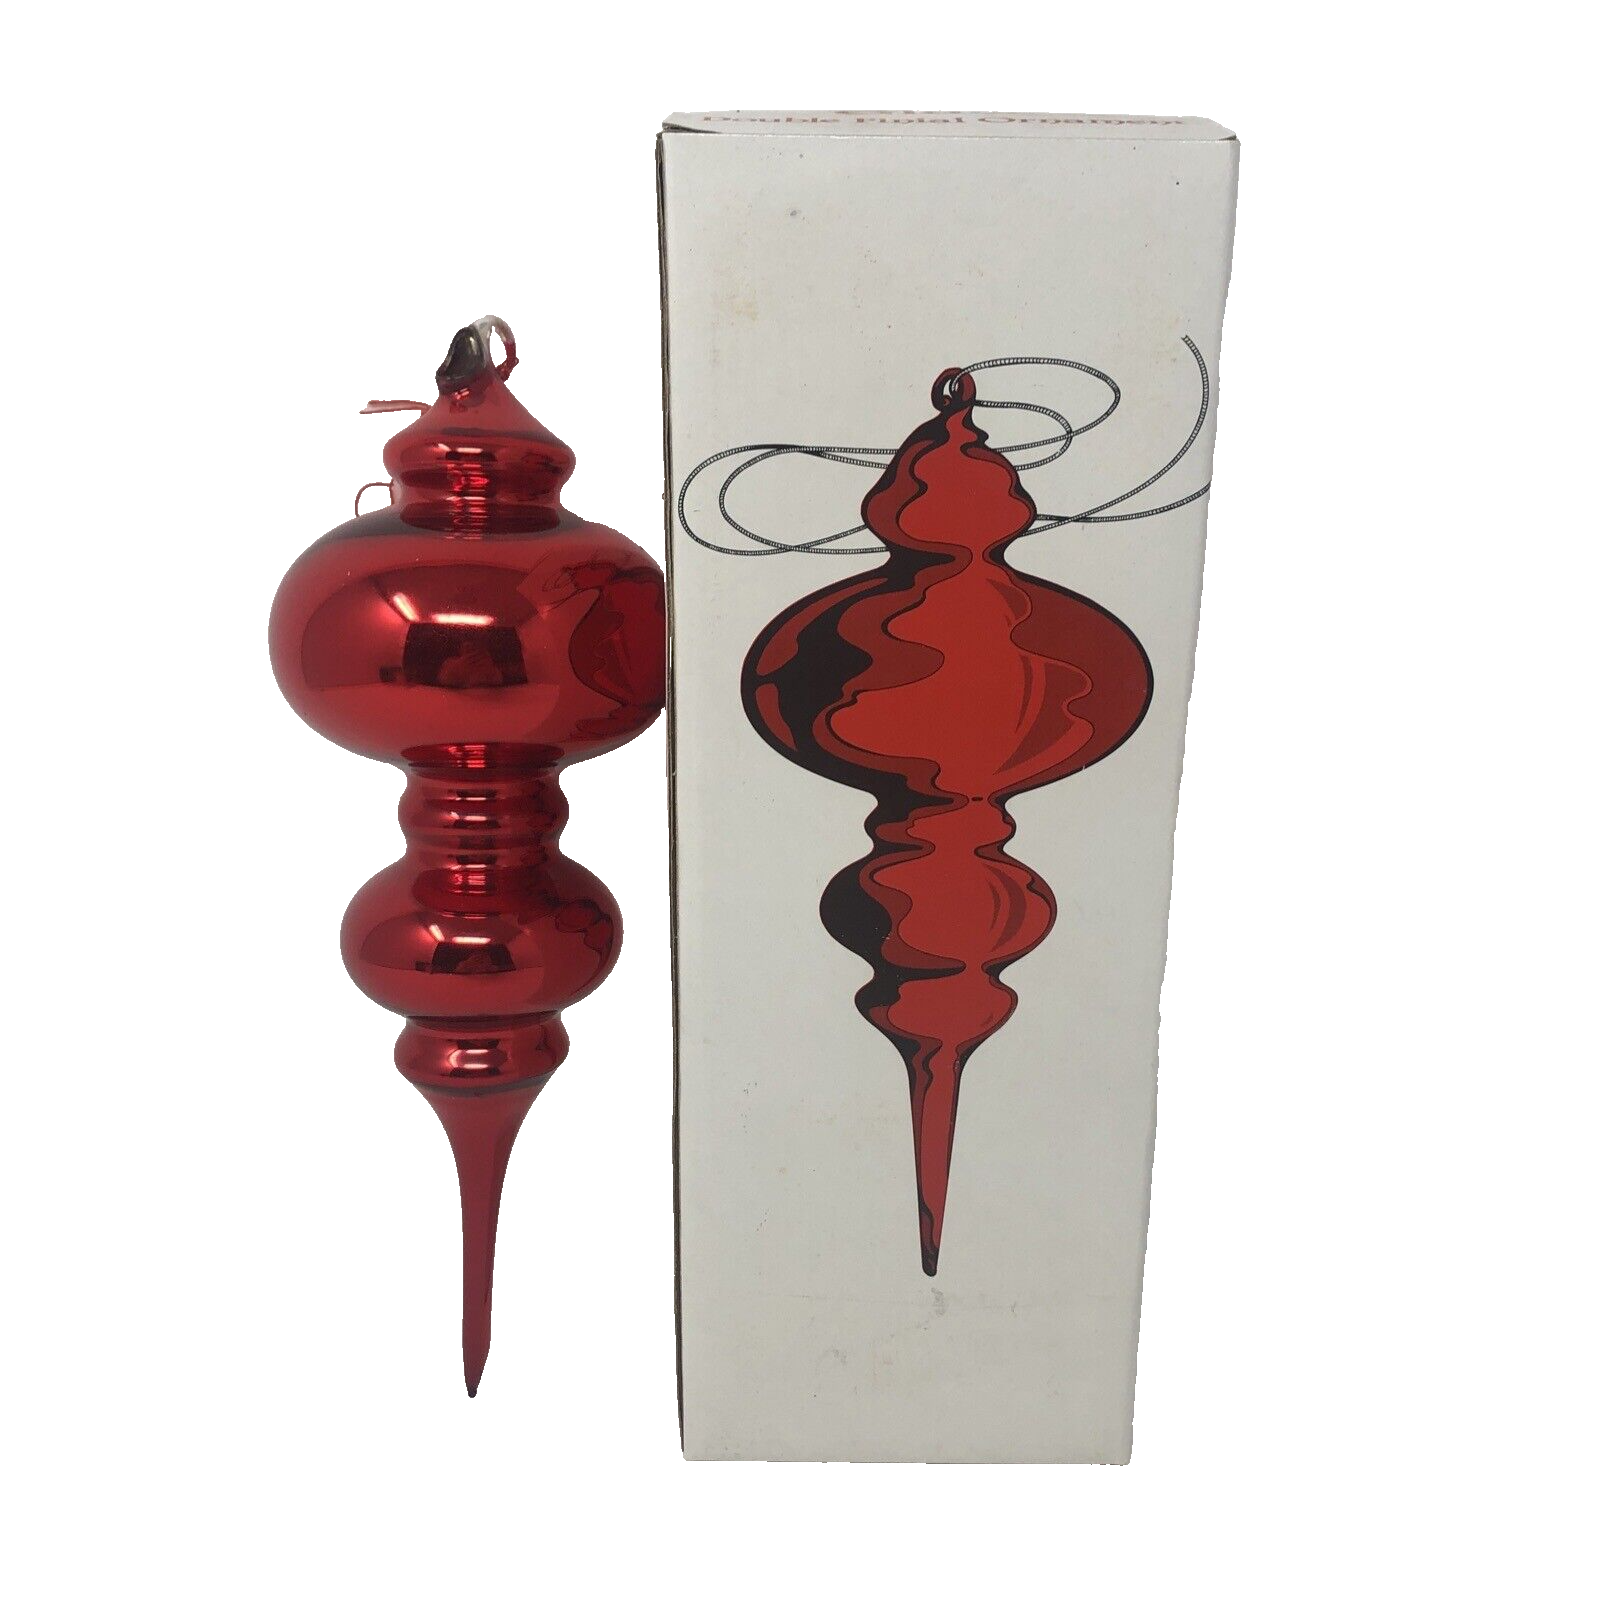 VTG DEPARTMENT 56 Mercury Glass Double Finial Ornament Red 10" with Box - $31.00